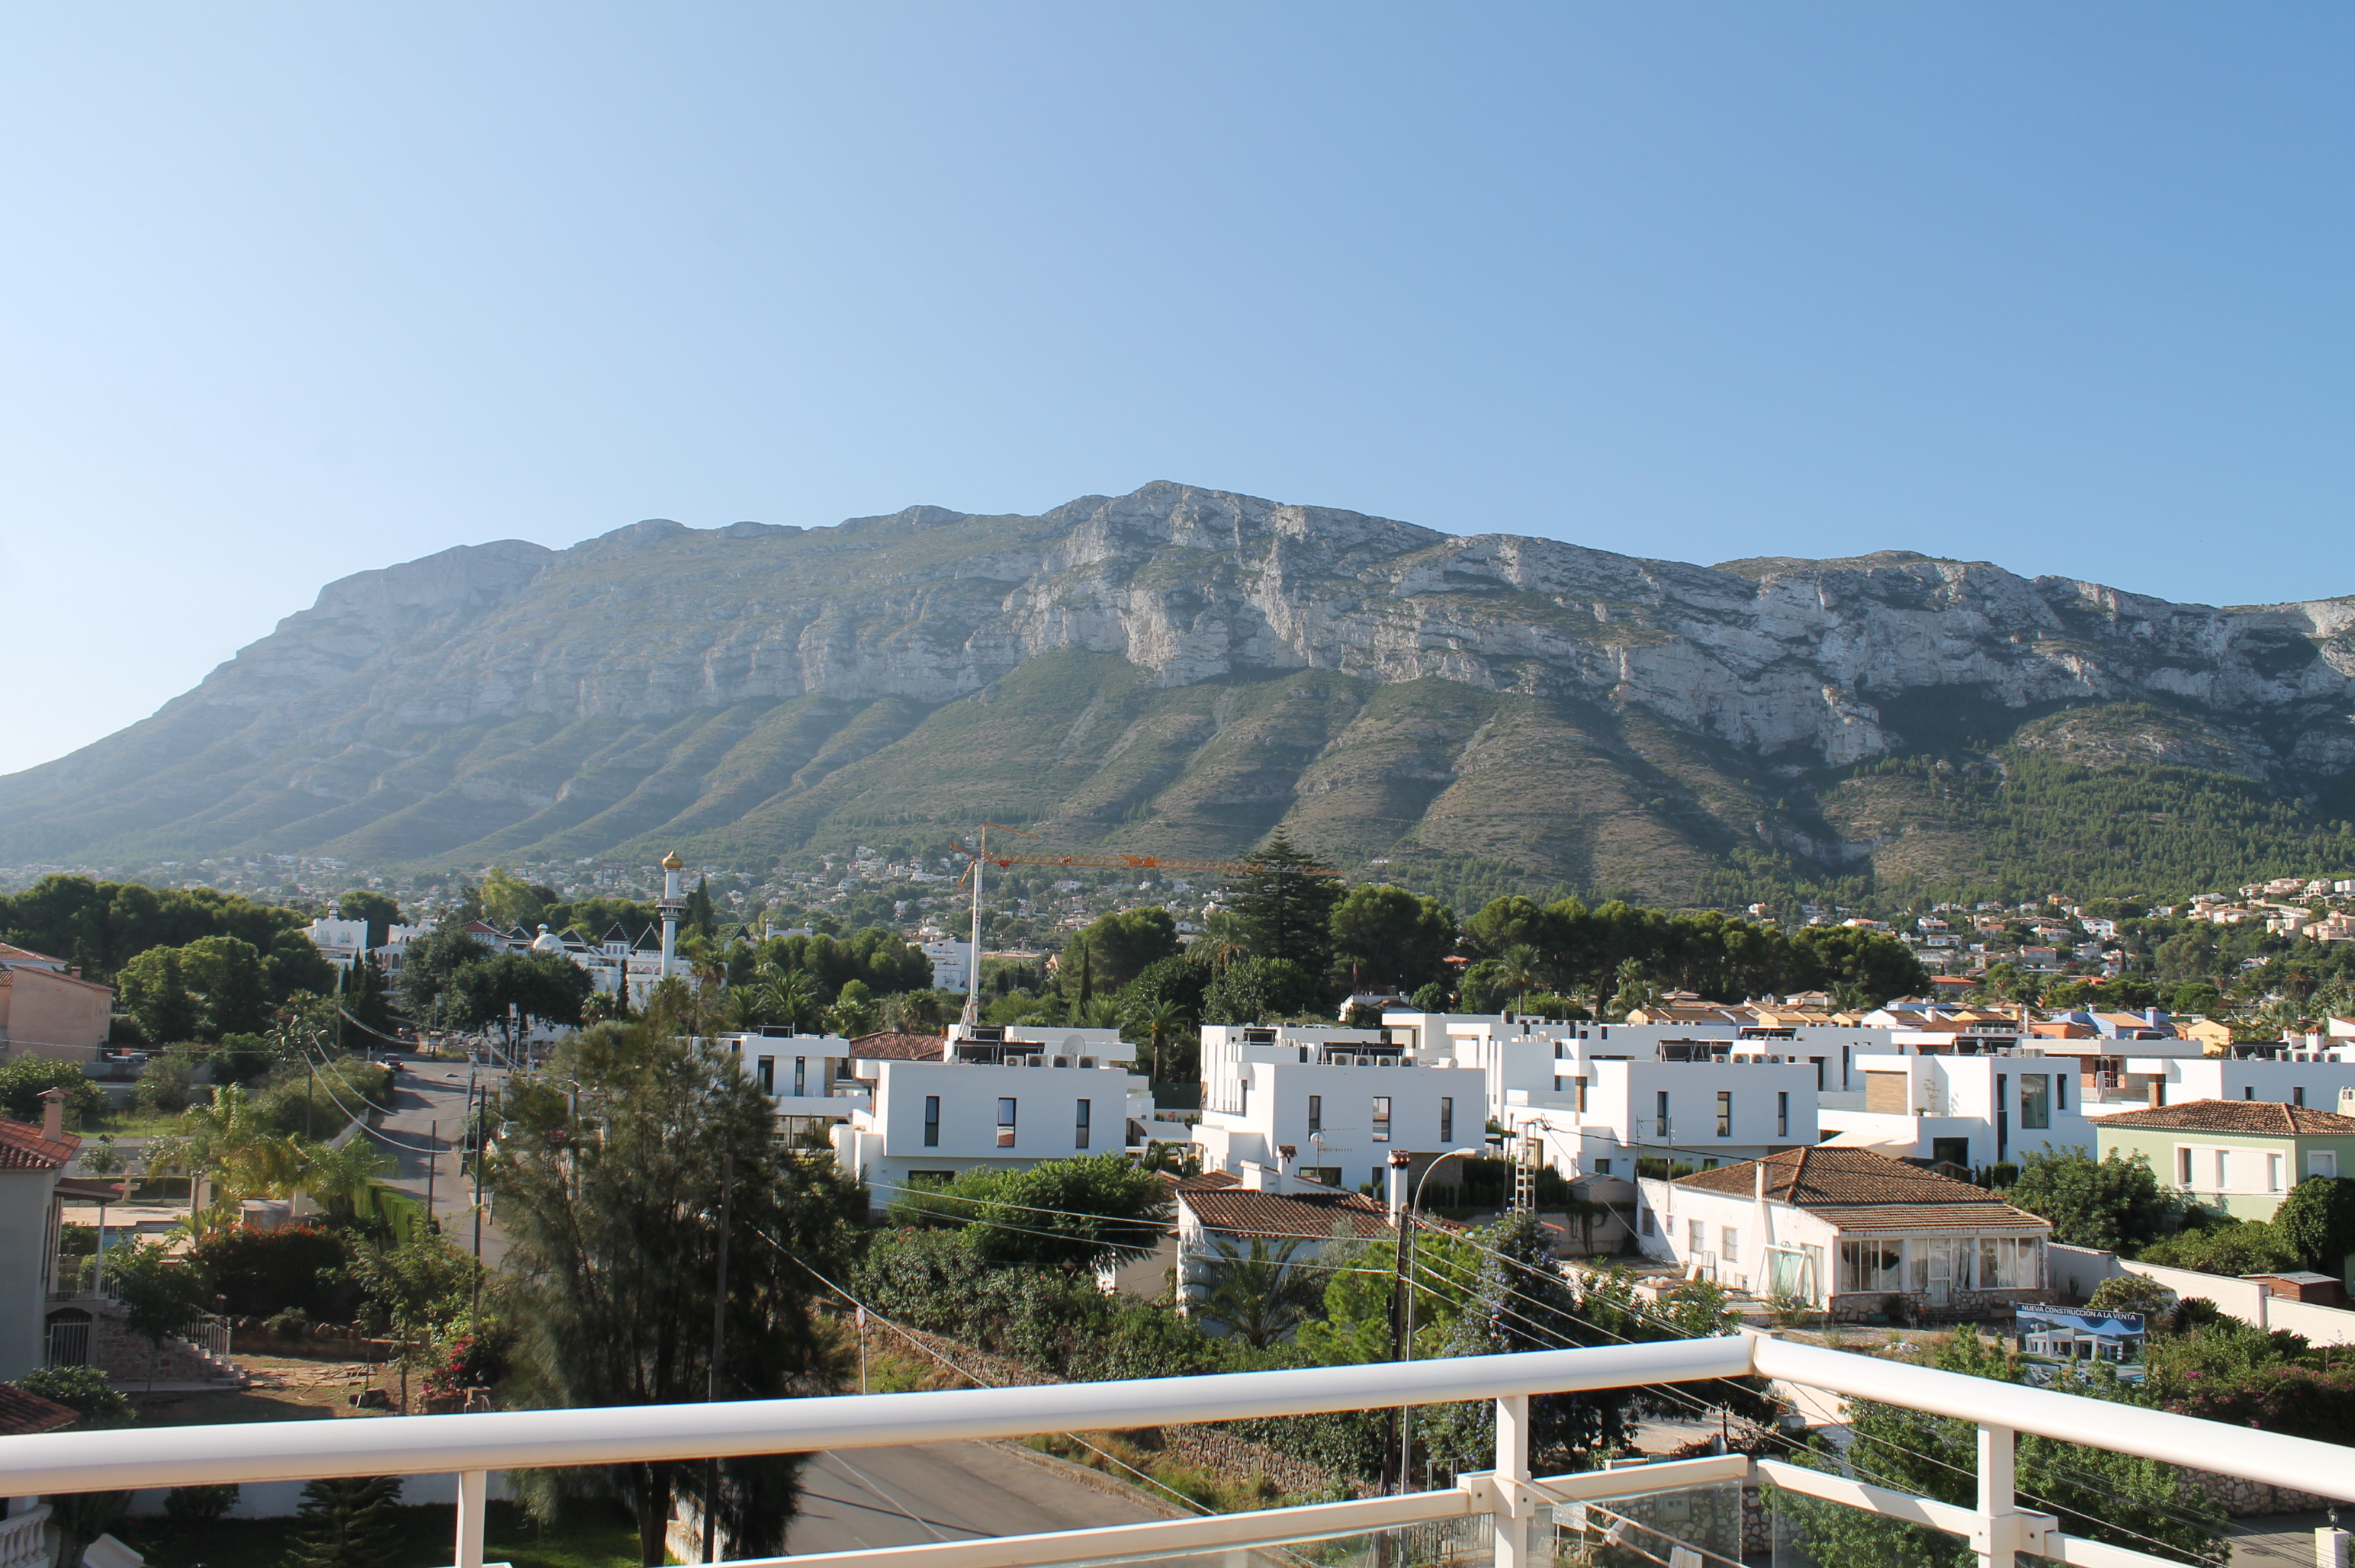 3 bedroom duplex penthouse for sale in Dénia a step away from the town with panoramic views of Montgo